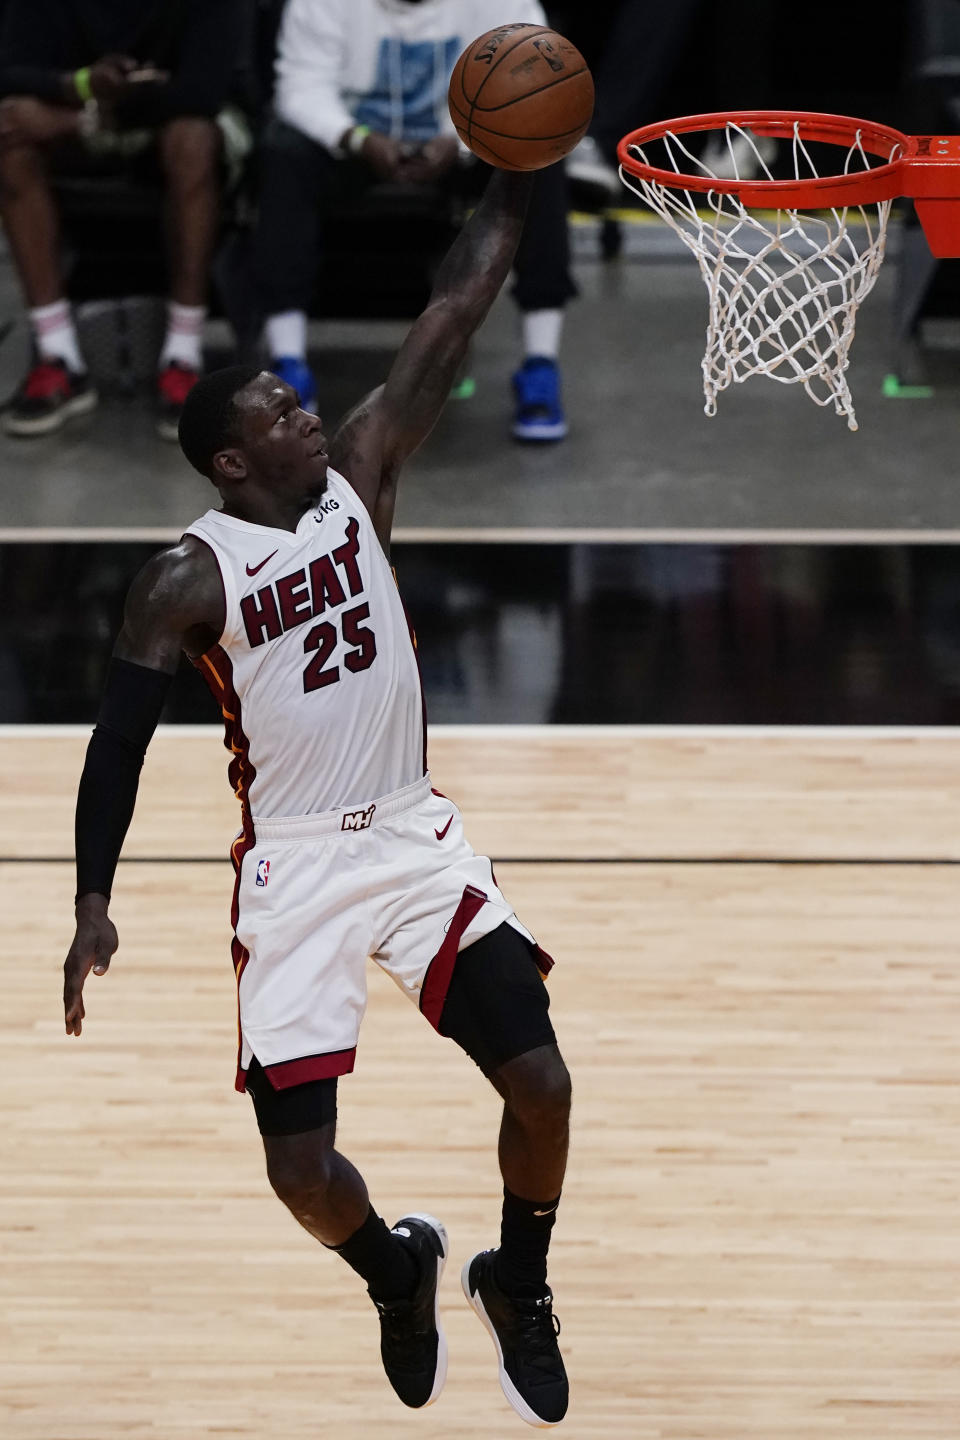 Miami Heat guard Kendrick Nunn (25) drives to the basket during the second half of an NBA basketball game against the Houston Rockets, Monday, April 19, 2021, in Miami. The Heat defeated the Rockets 113-91. (AP Photo/Marta Lavandier)